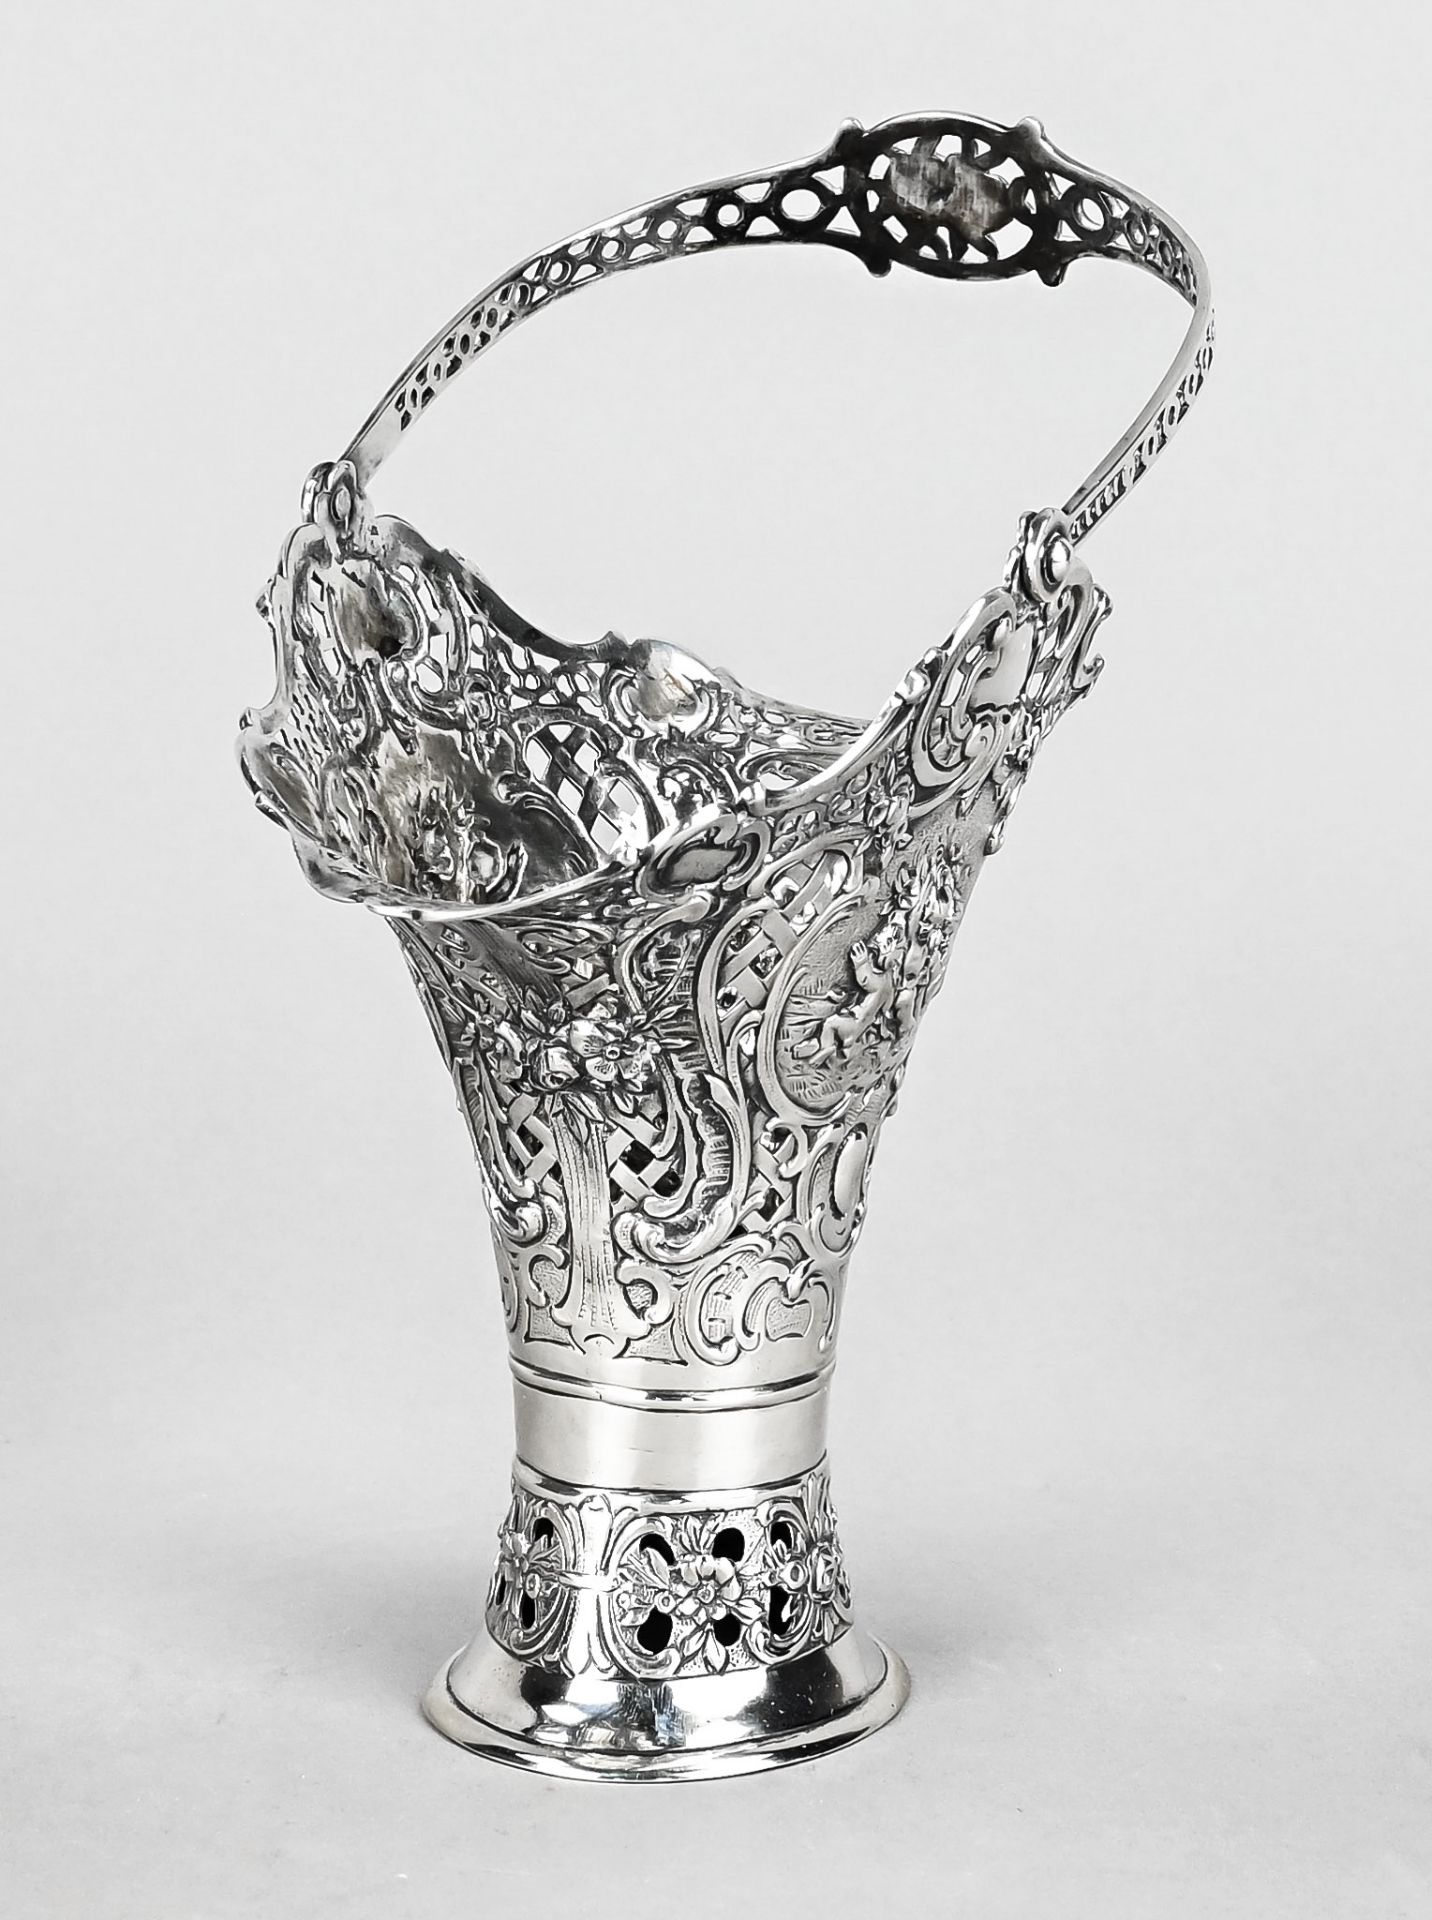 Chocolate basket with handle, Germany c. 1900, silver 800 hallmarked, openwork with vine tendrils H - Image 3 of 3